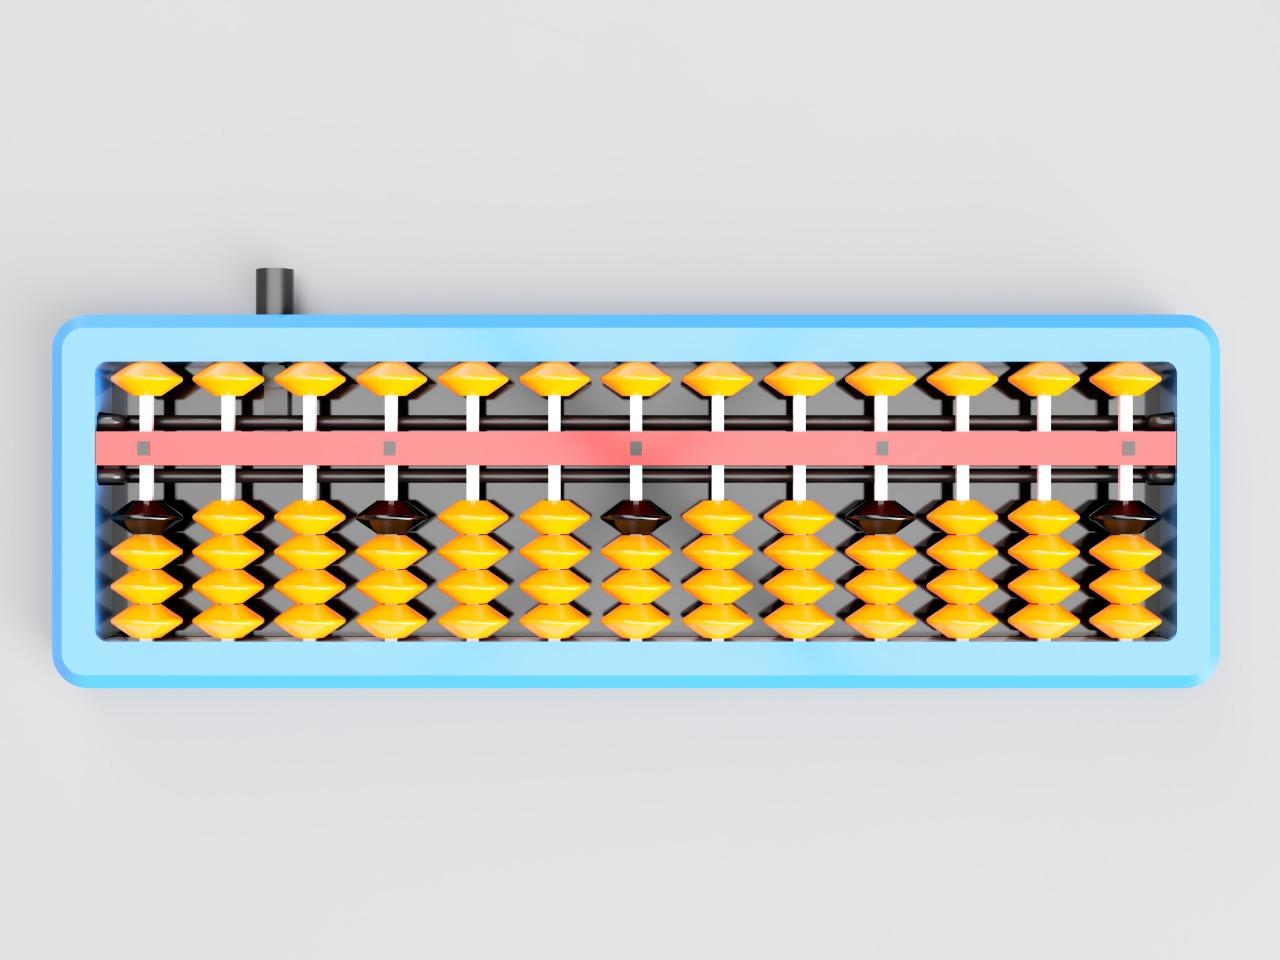 ABACUS 13 DIGITS WITH RESET BUTTON (1-4 JAPANESE VERSION) 3d model